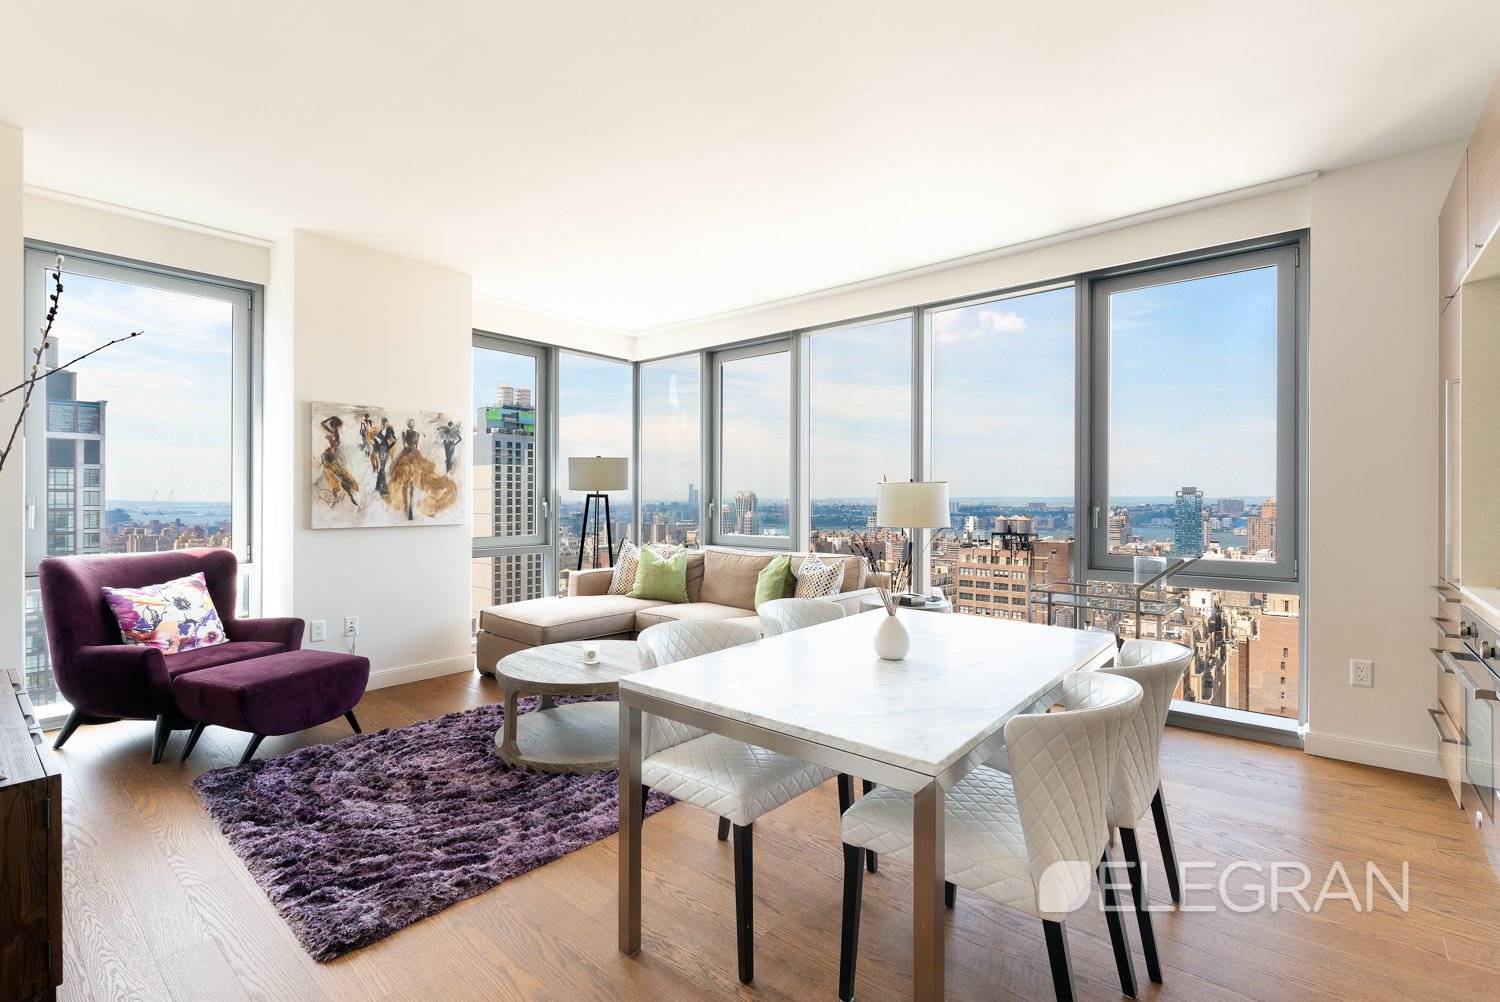 Located at 100 West 31st Street, EOS apartments are distinctive luxury residences for the New Yorker who wants the best this city has to offer.